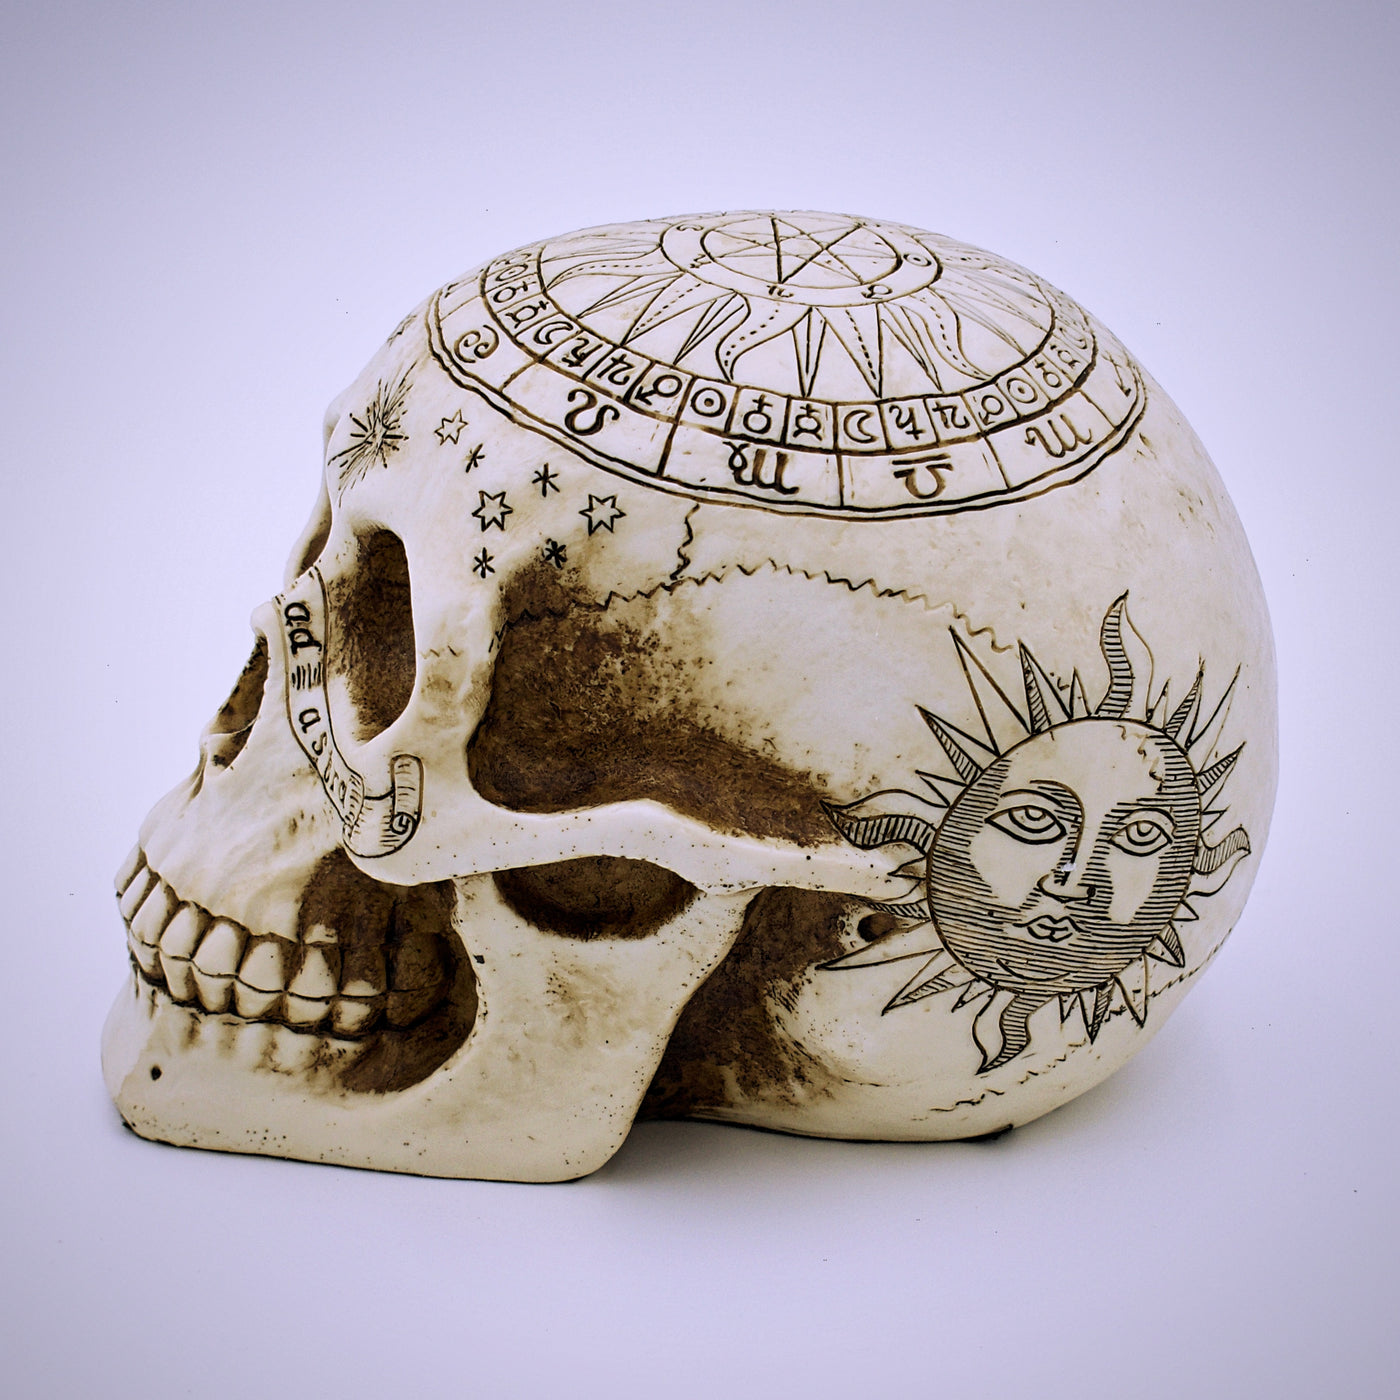 Astrological Design Skull Sculpture - The Cranio Collections